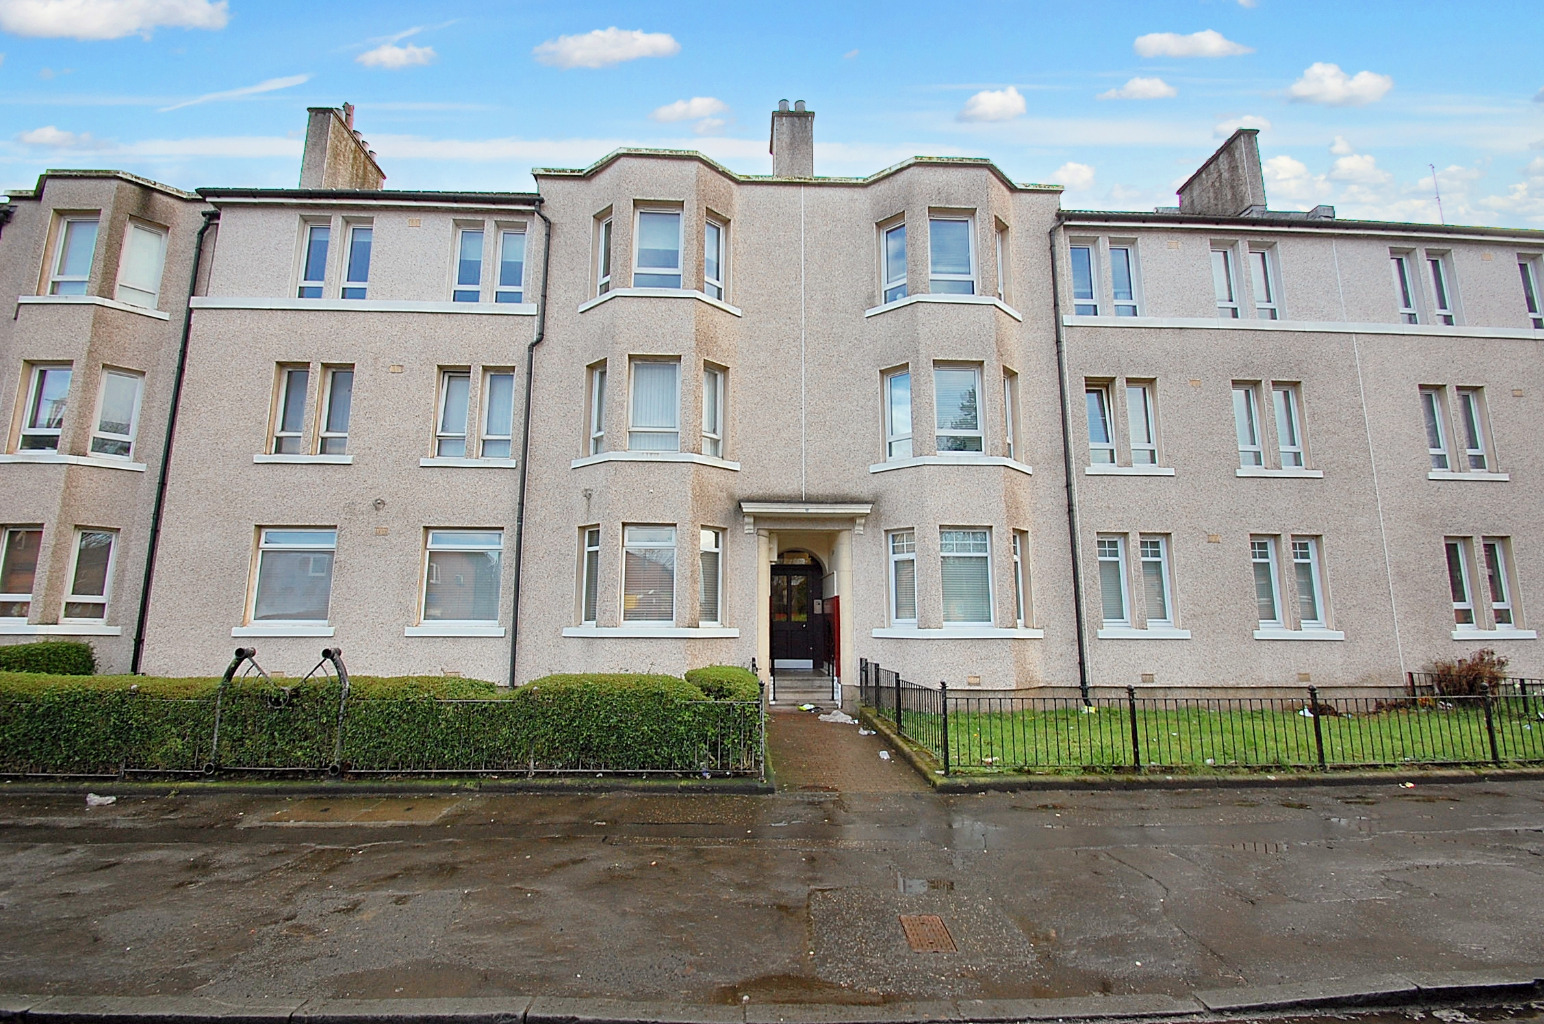 3 bed flat for sale in Summertown Road, Glasgow - Property Image 1